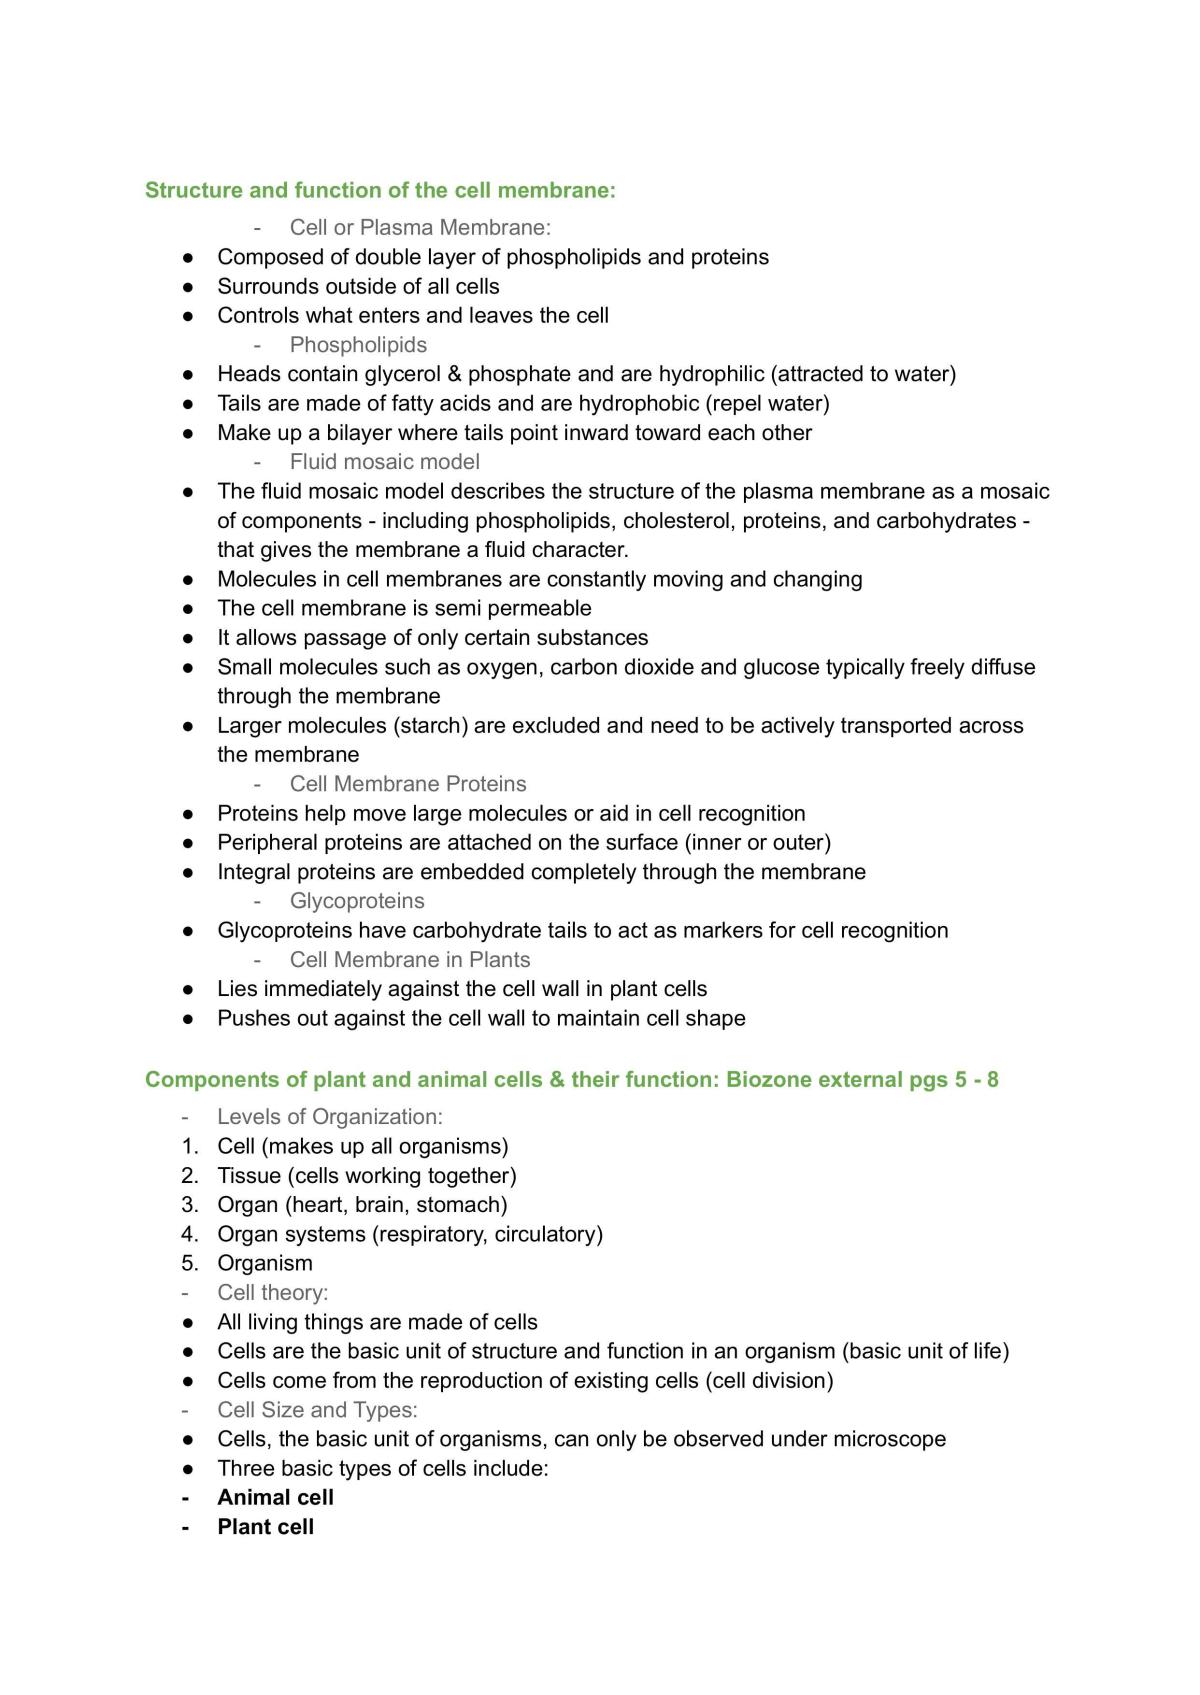 Level 2 NCEA Biology  - Page 1